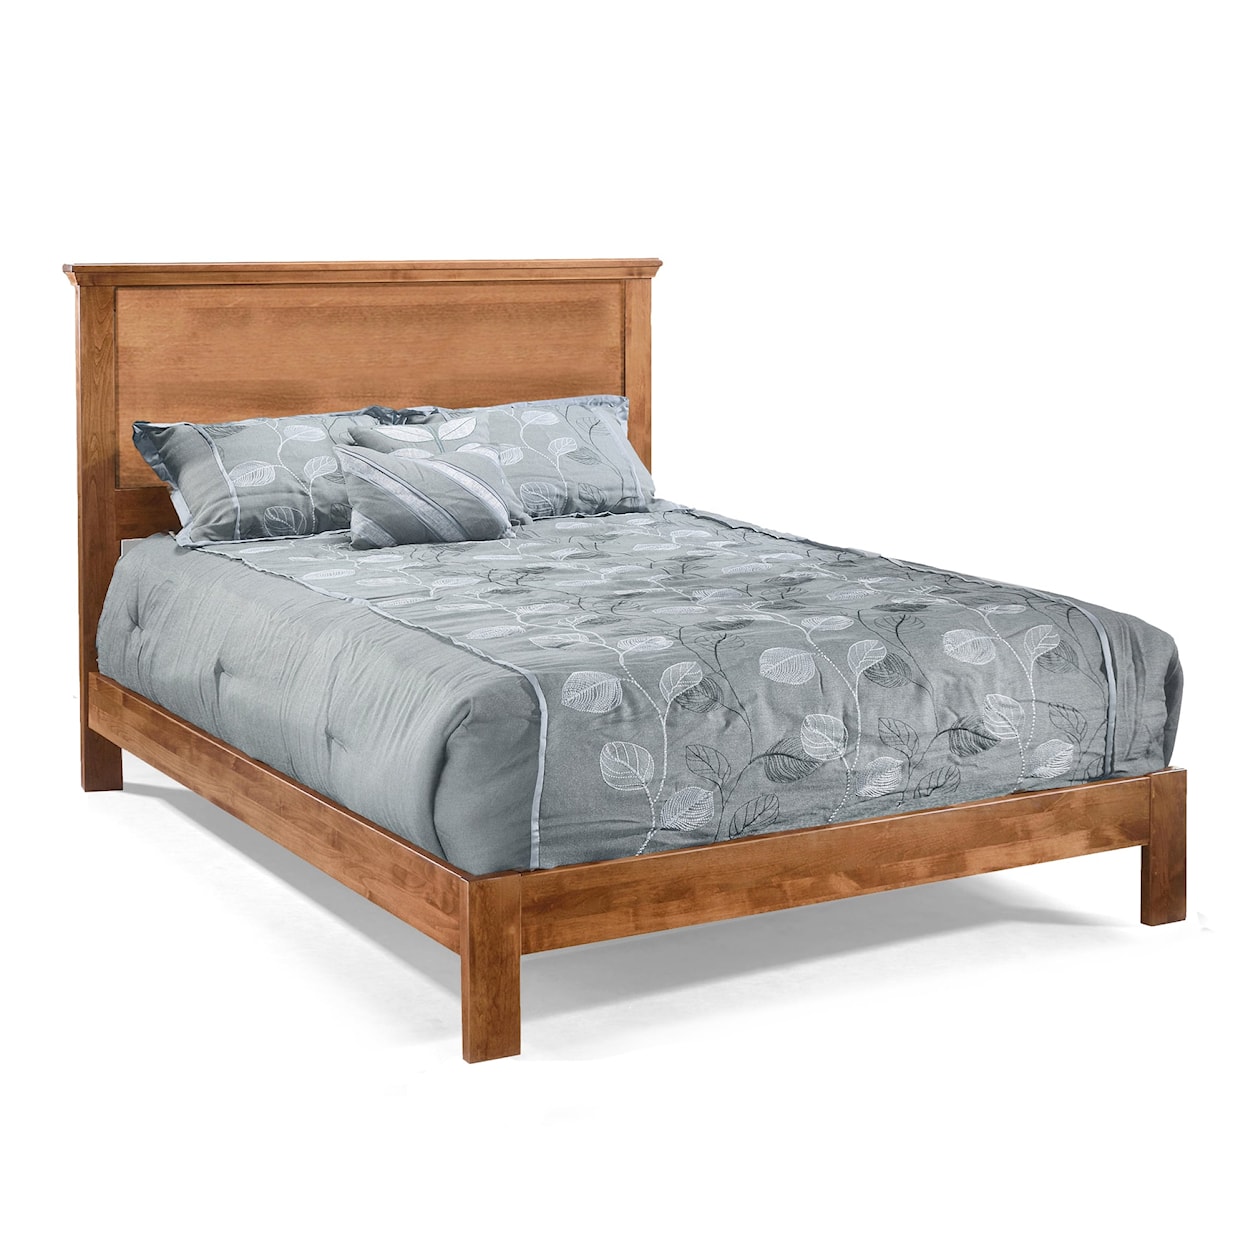 Archbold Furniture Heritage Queen Plank Headboard Only